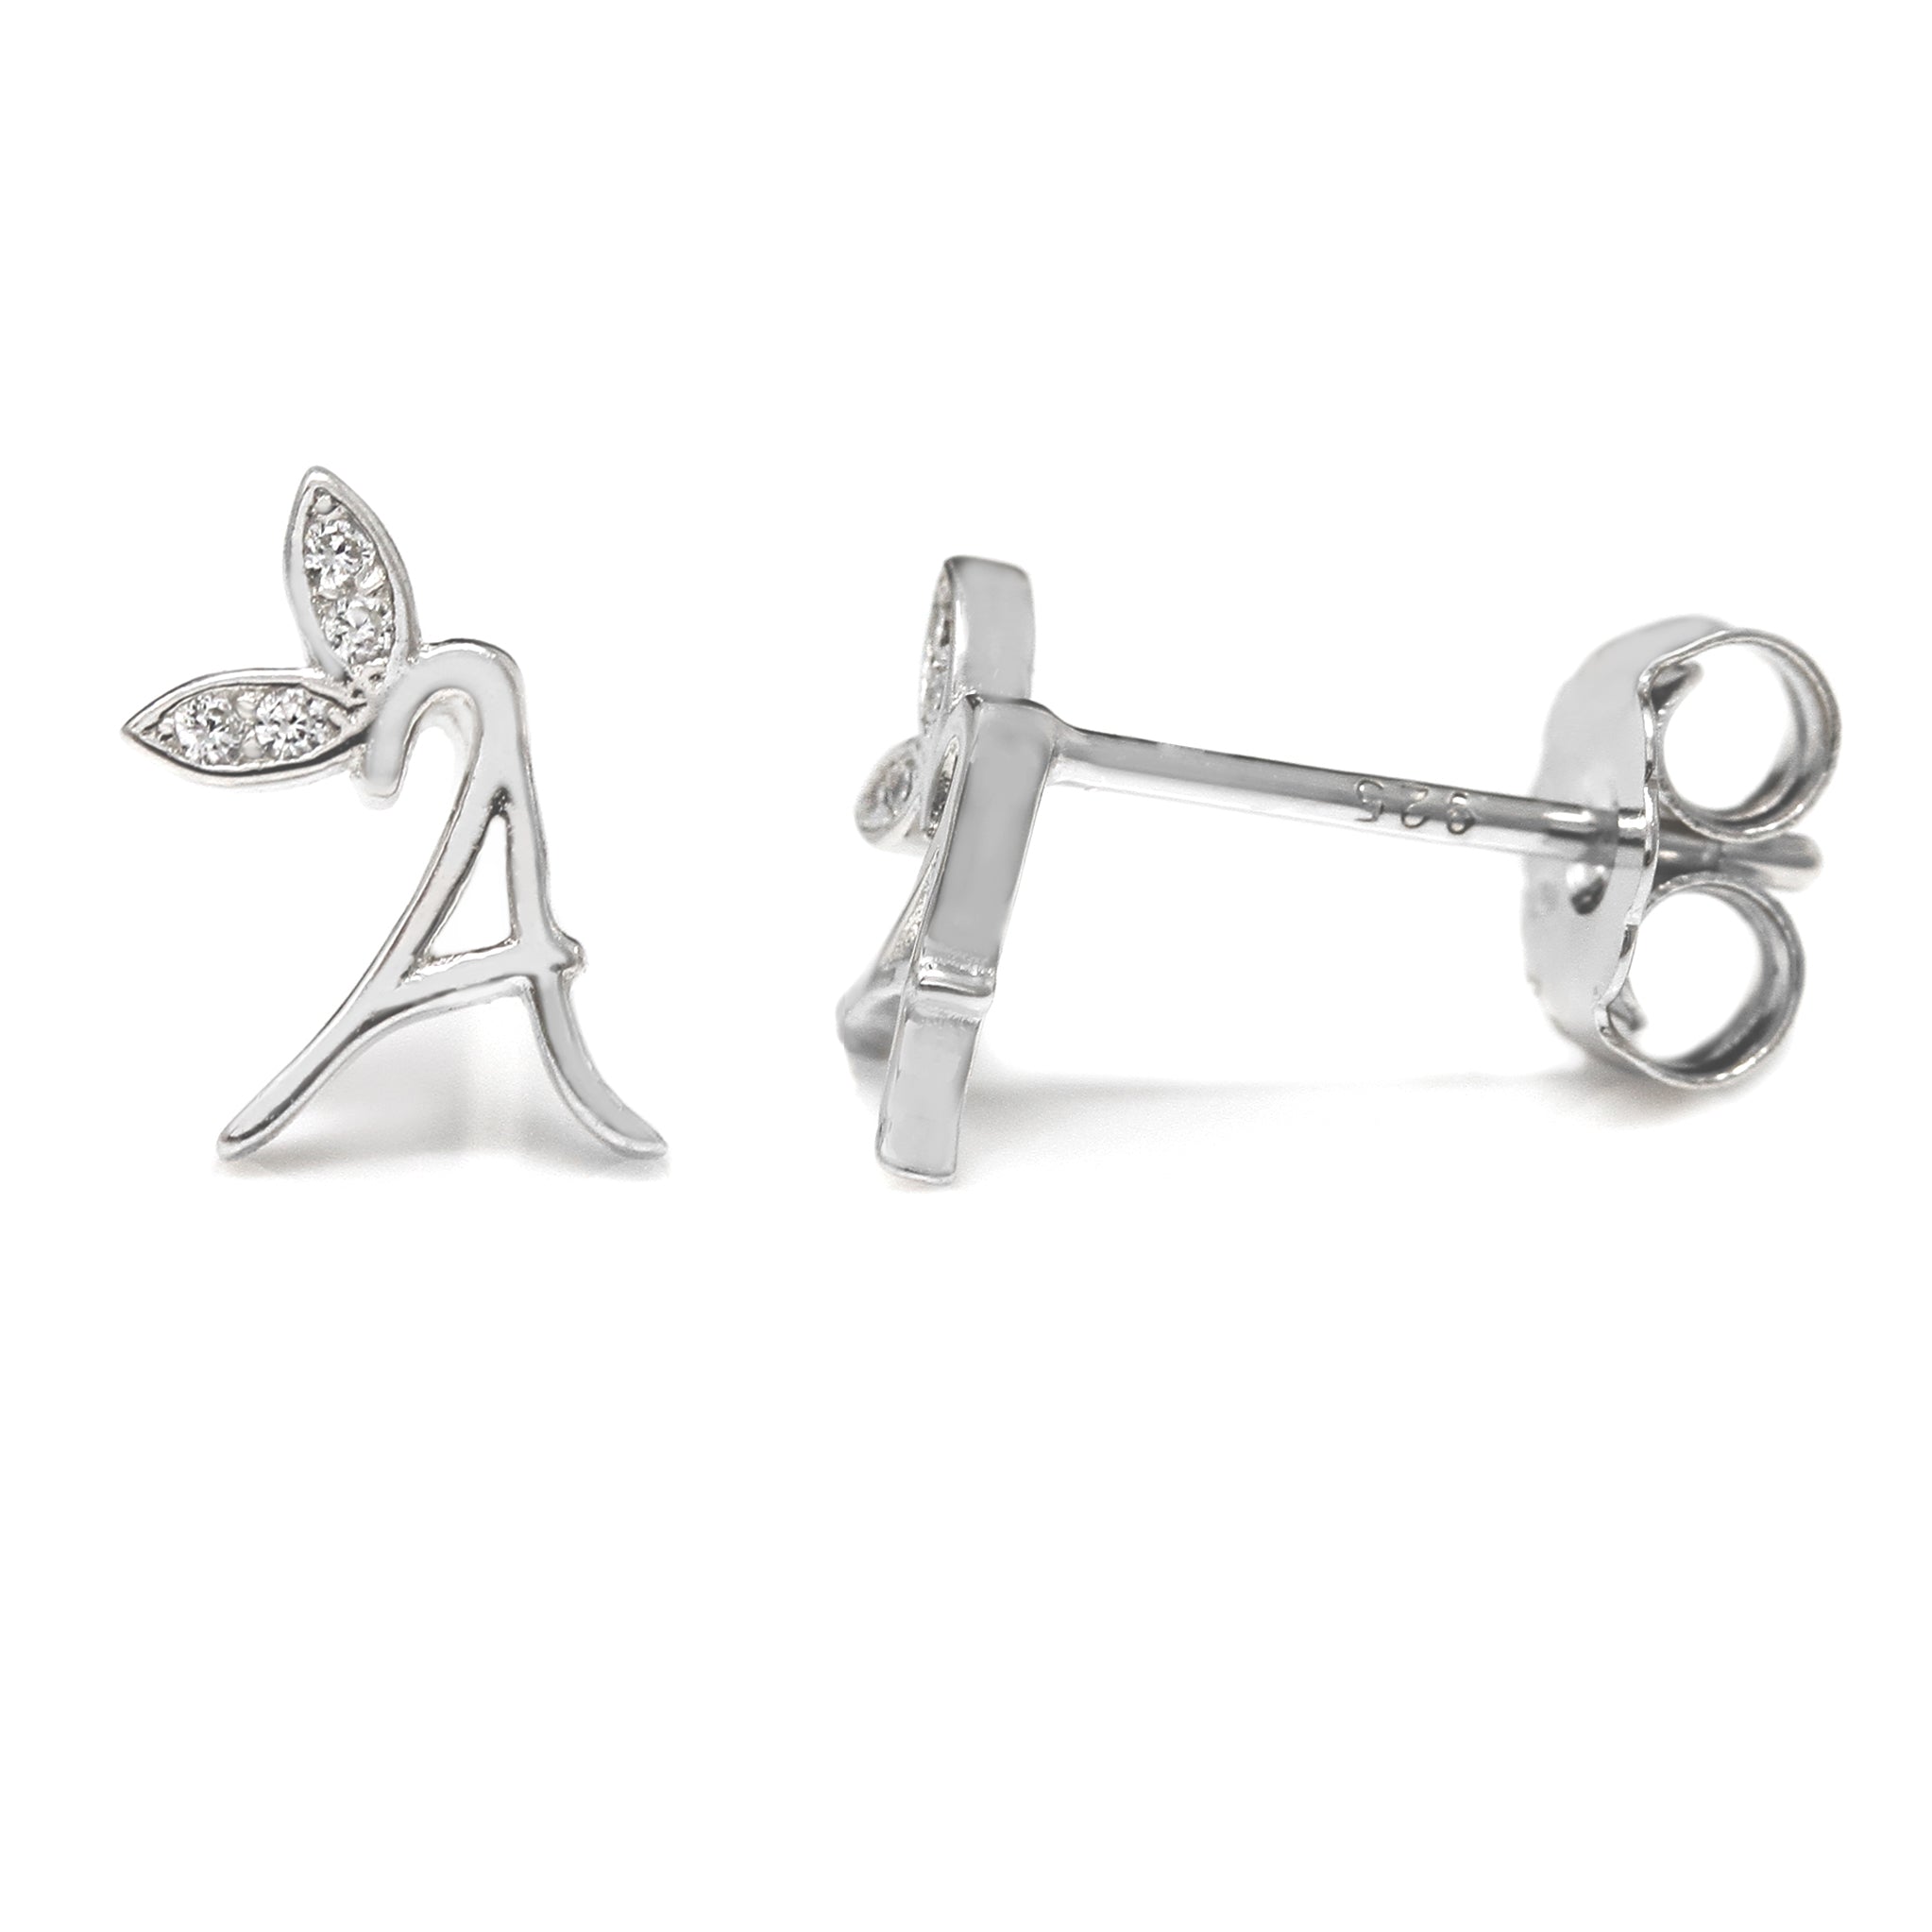 Share more than 245 unique initial earrings best